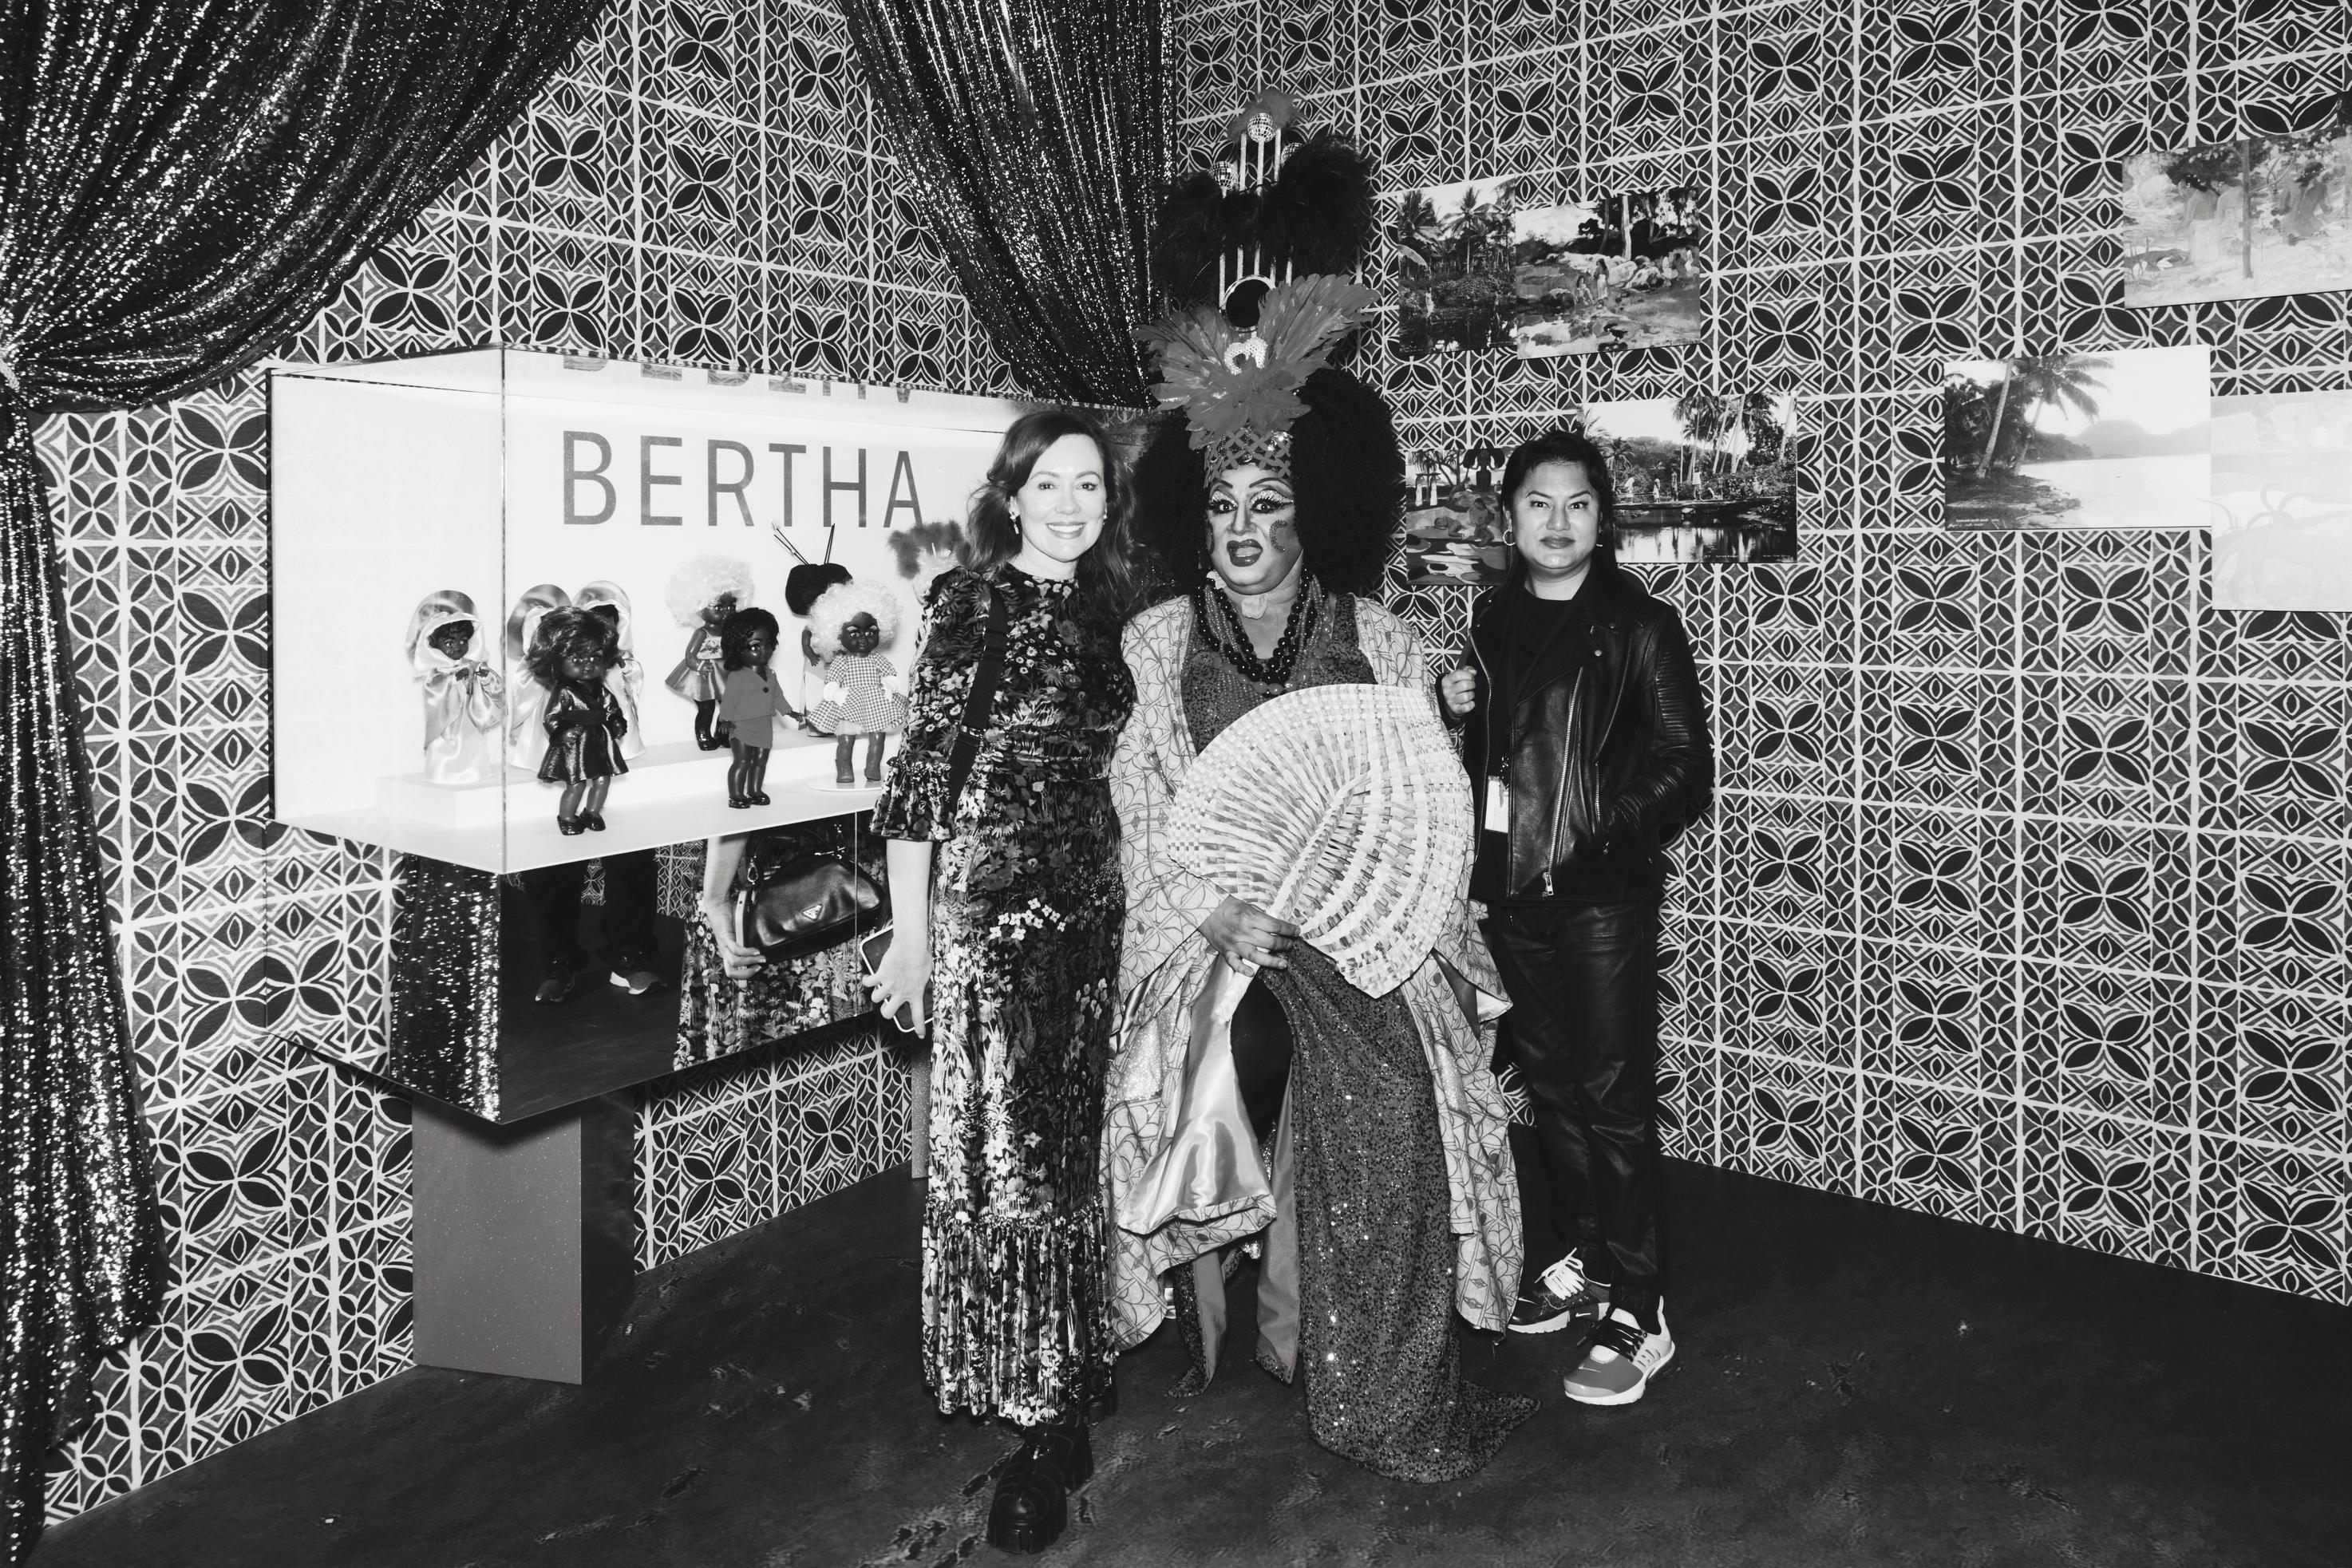 Three people stand in front of the BERTHA exhibition installation at the Powerhouse Museum, Ultimo.